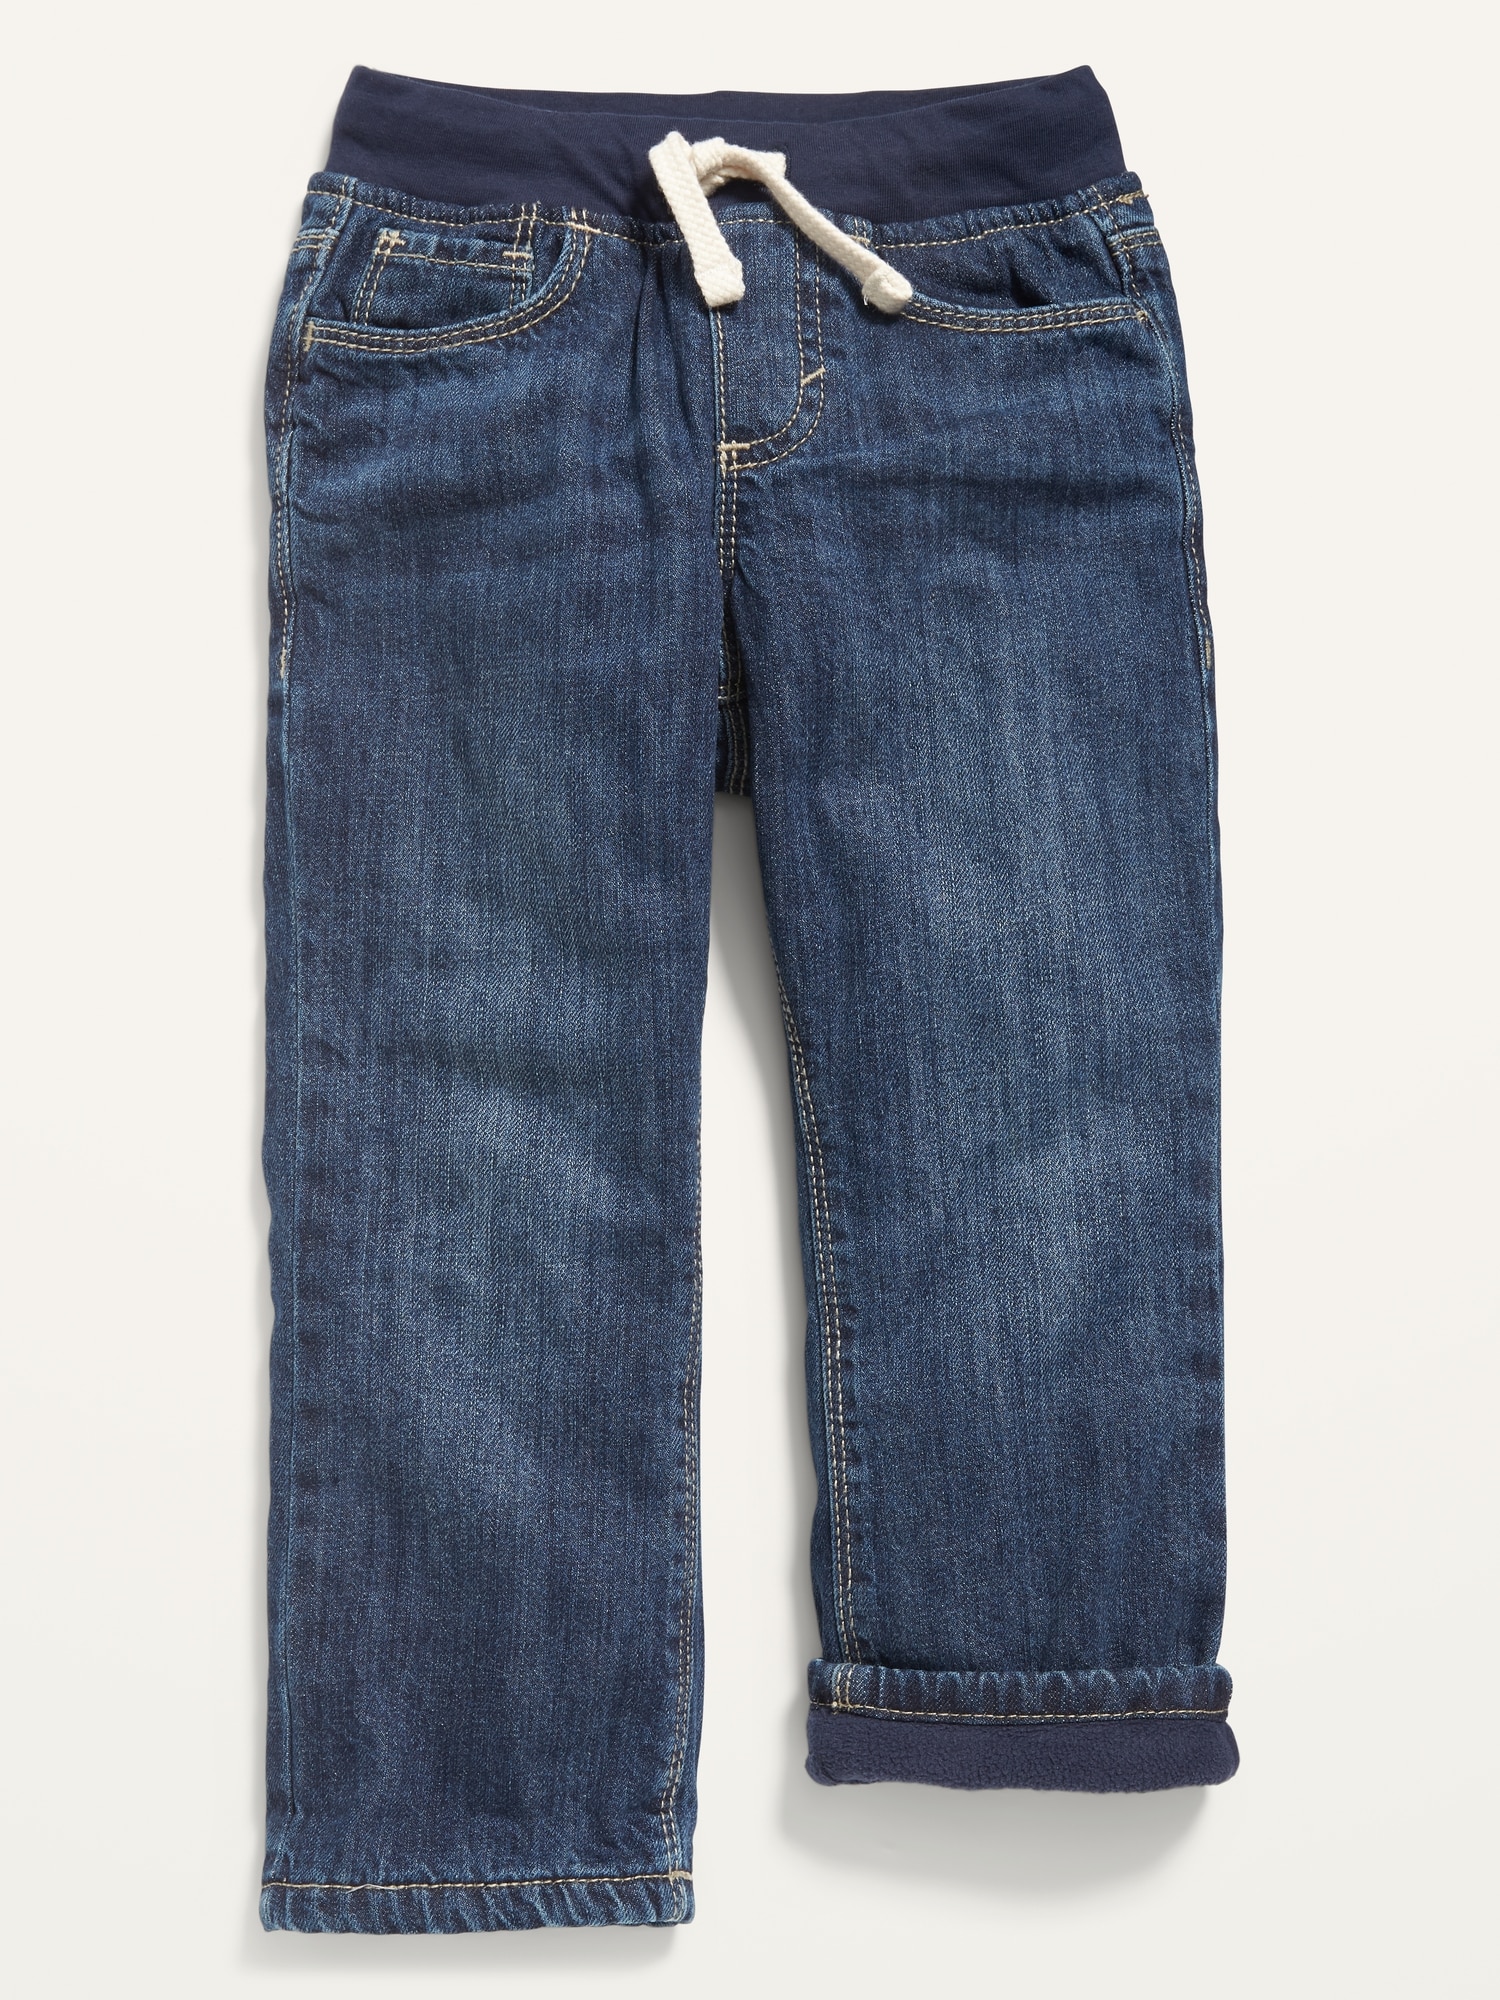 lined jeans old navy